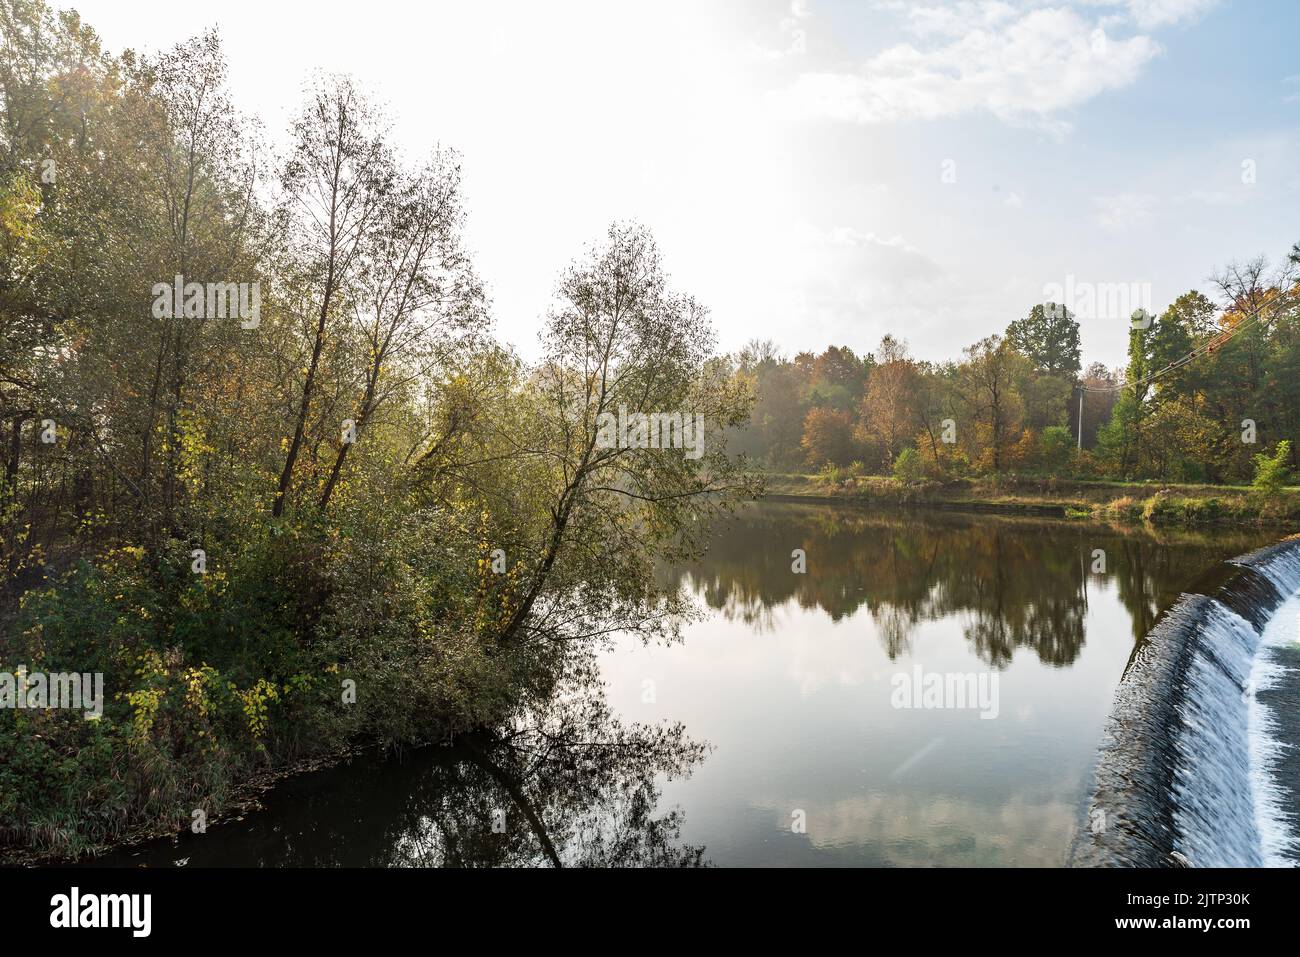 Wisla river near Skoczow town in Poland during autumn day wiith blue sky and clouds Stock Photo